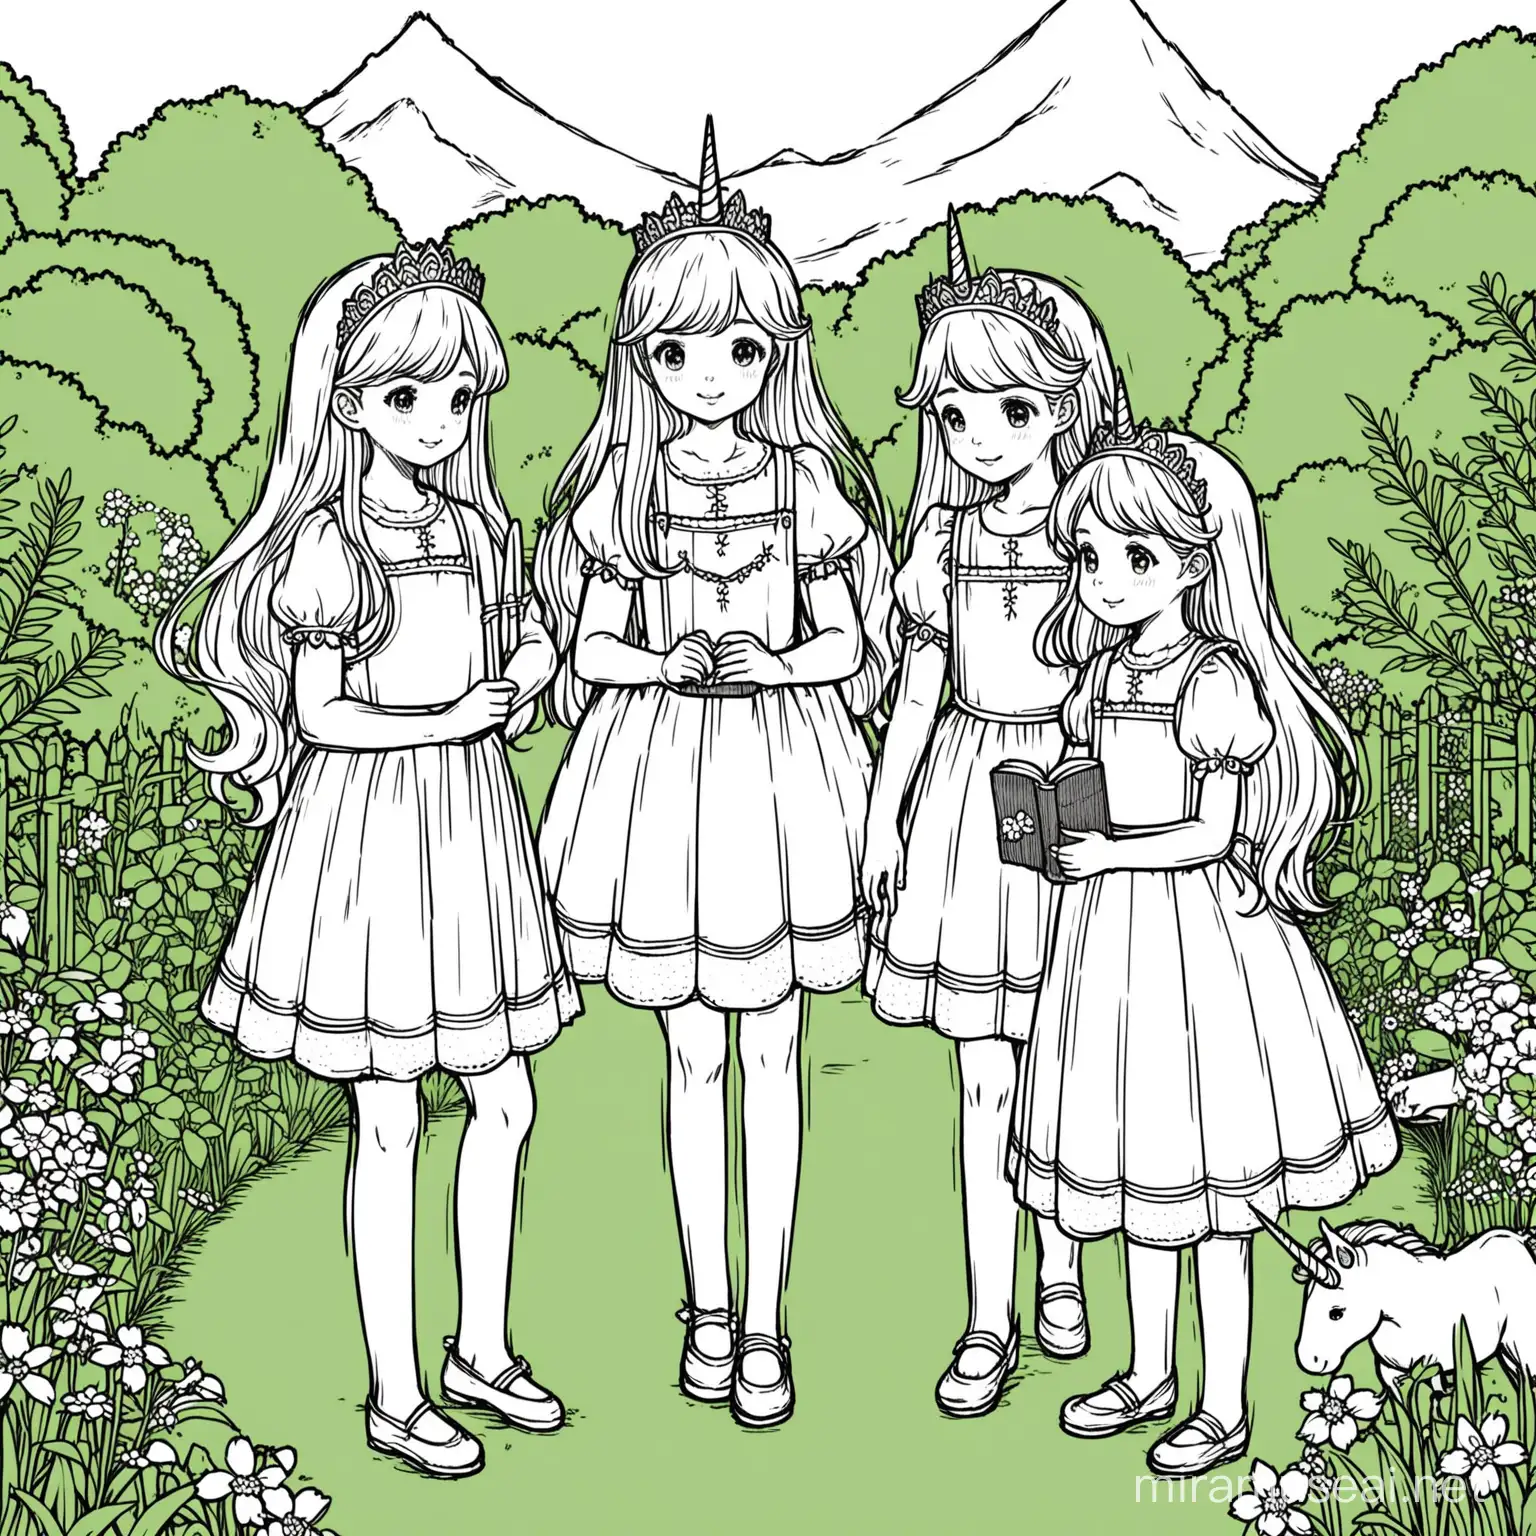 a production ready flat coloring black and white drawing of three little princess girls in a beautiful garden, beside an unicorn, inspired by CharacterOrdinary551 reddit field journal line art, children's illustration, flat coloring. 